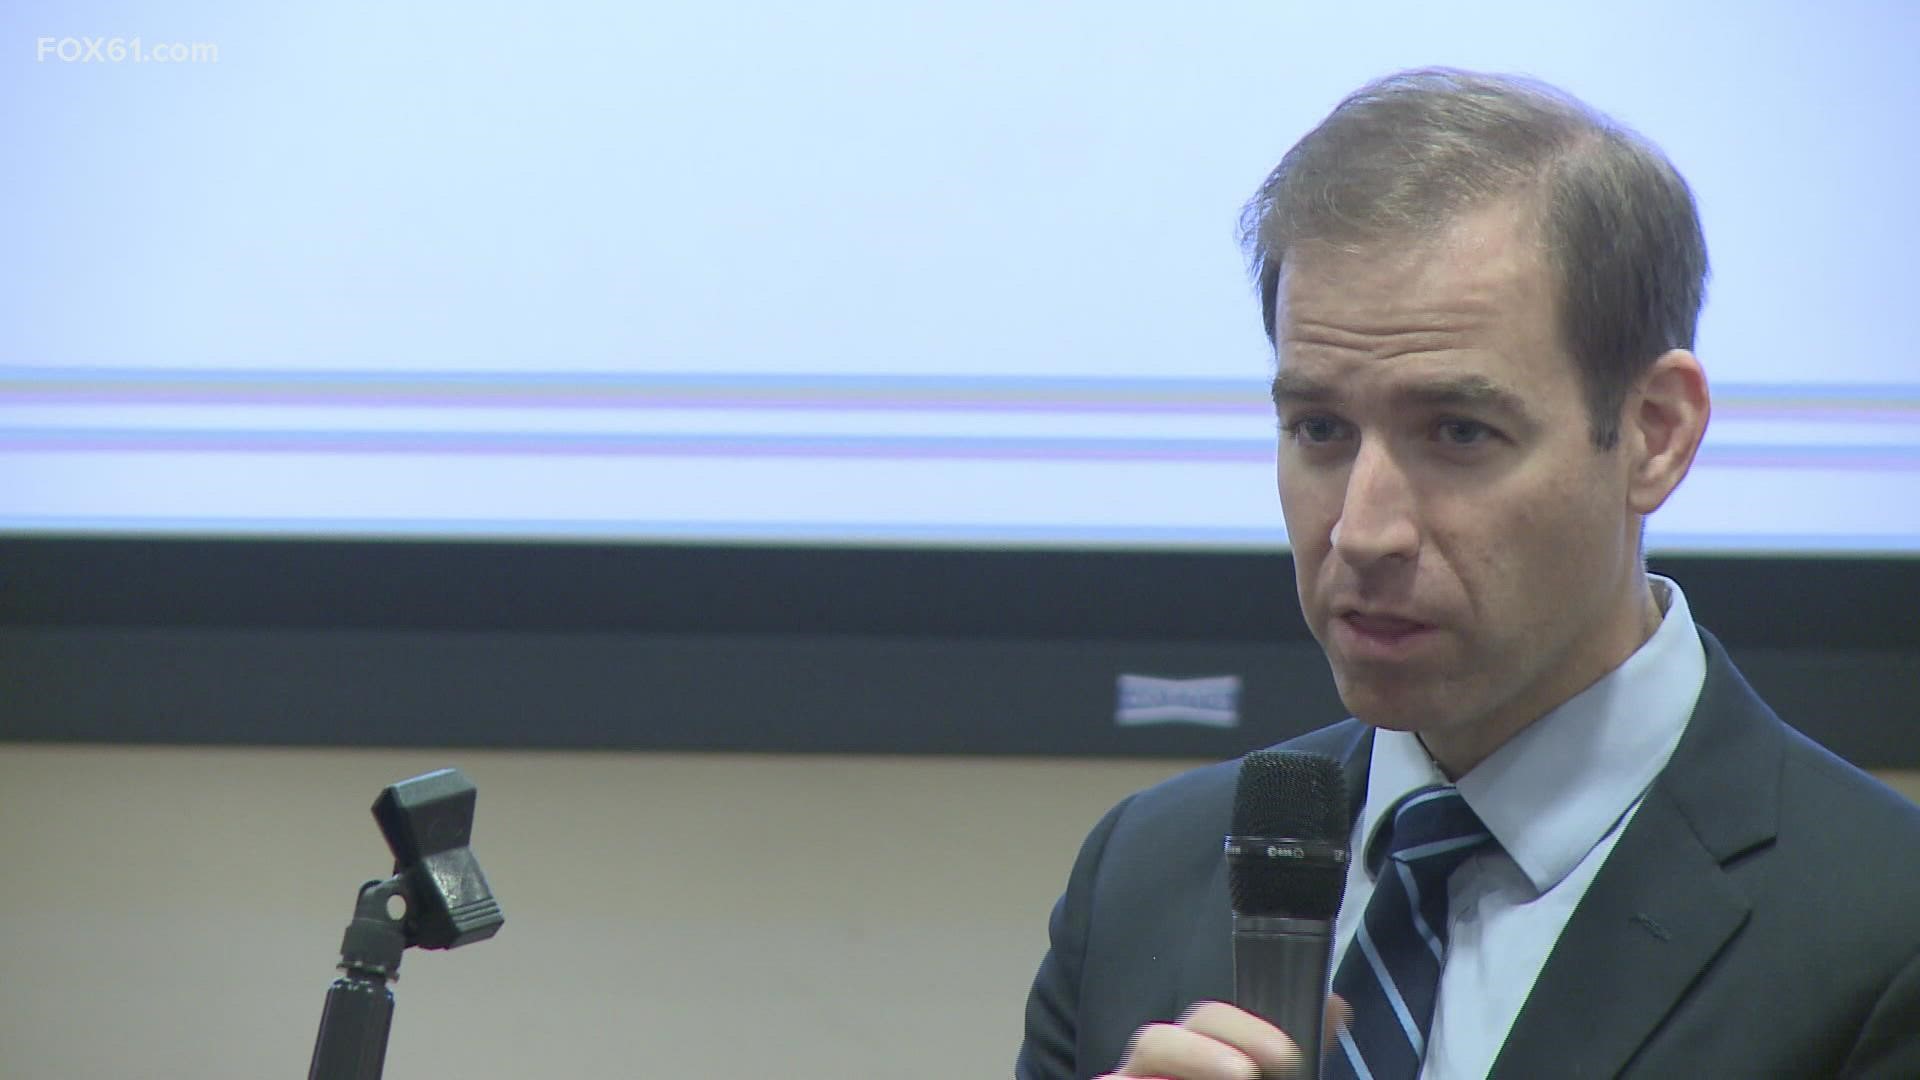 Bronin said he expects to recover in the hospital for approximately five to seven days.